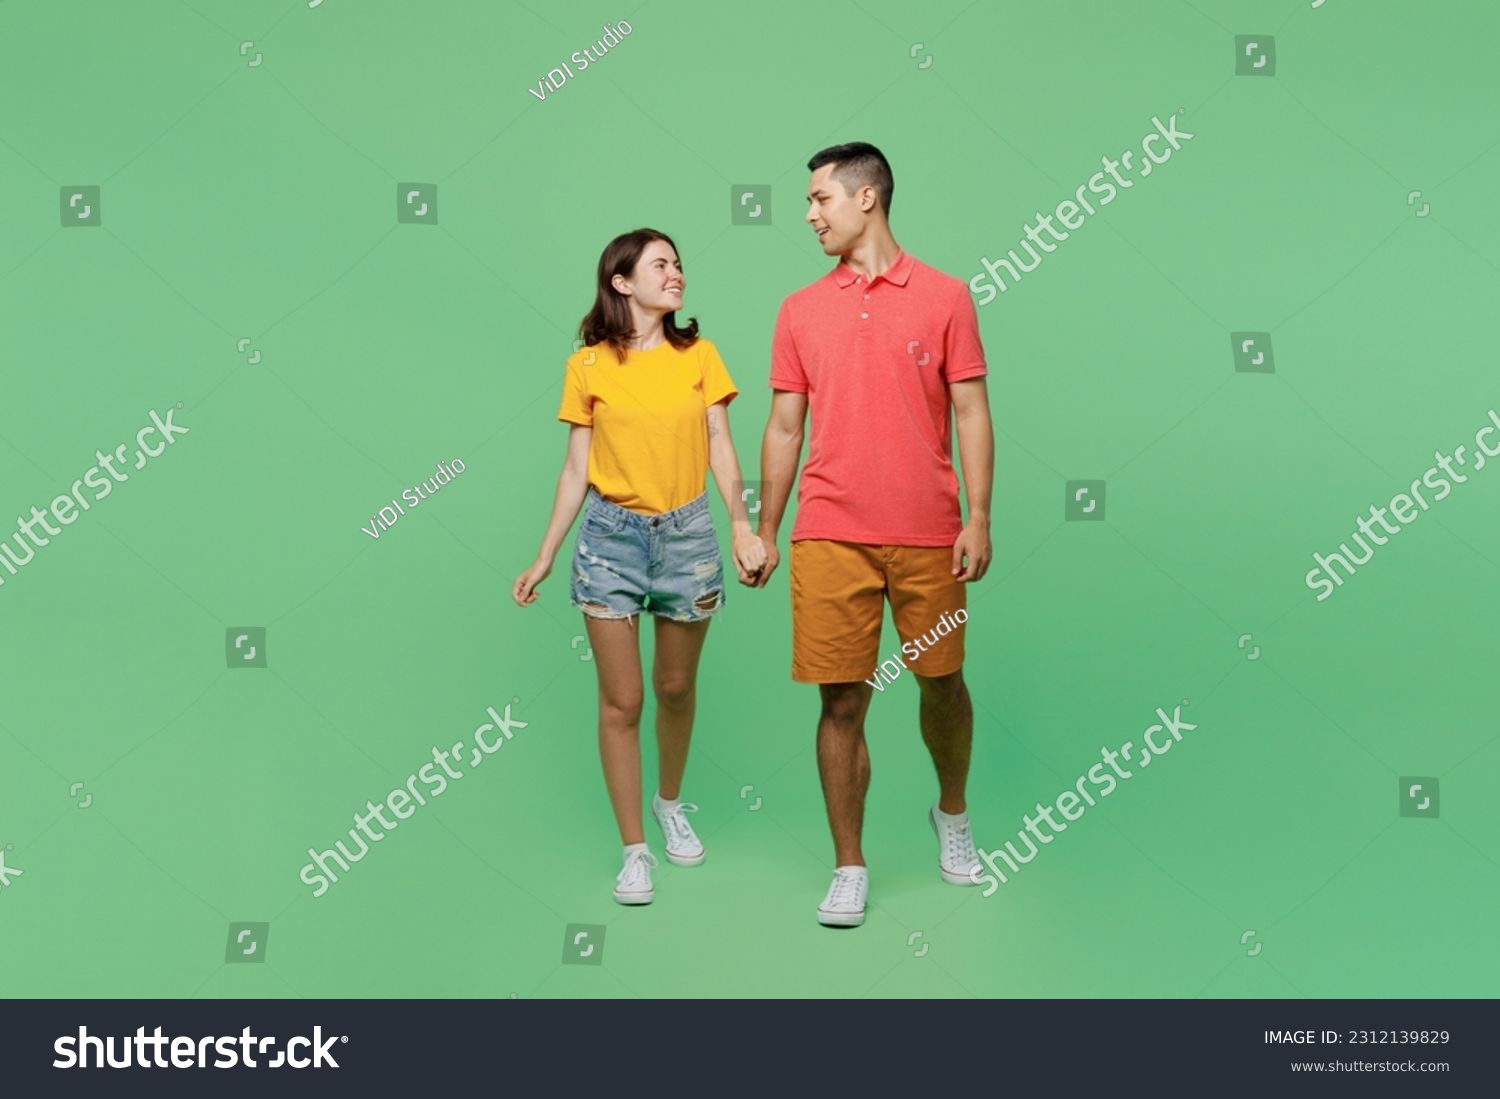 Full body happy smiling young couple two friends family man woman wear basic t-shirts together walk going hold hands look to each other isolated on pastel plain light green background studio portrait #2312139829